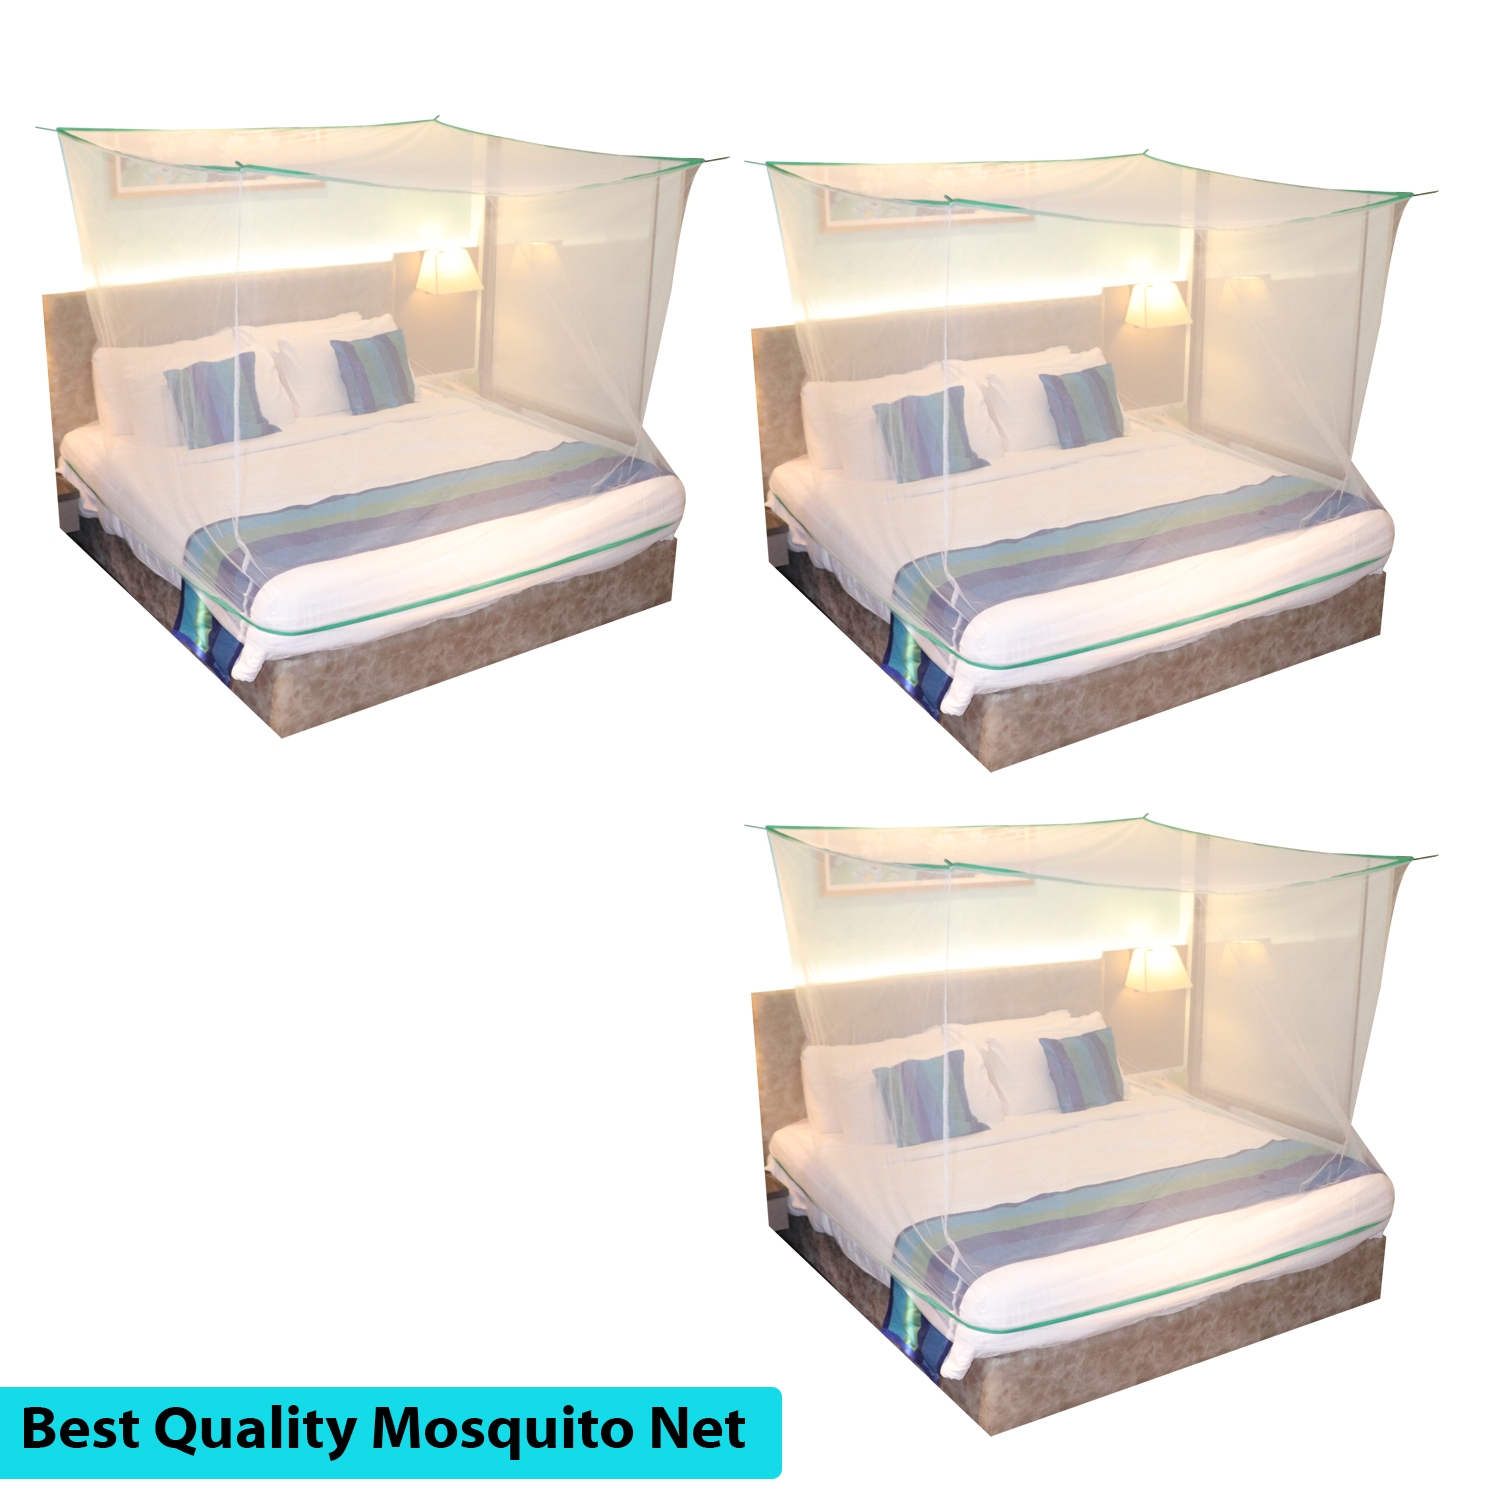 SILVER SHINE | Mosquito Net for Double Bed, King-Size, Square Hanging Foldable Polyester Net White And GreenPack of 3